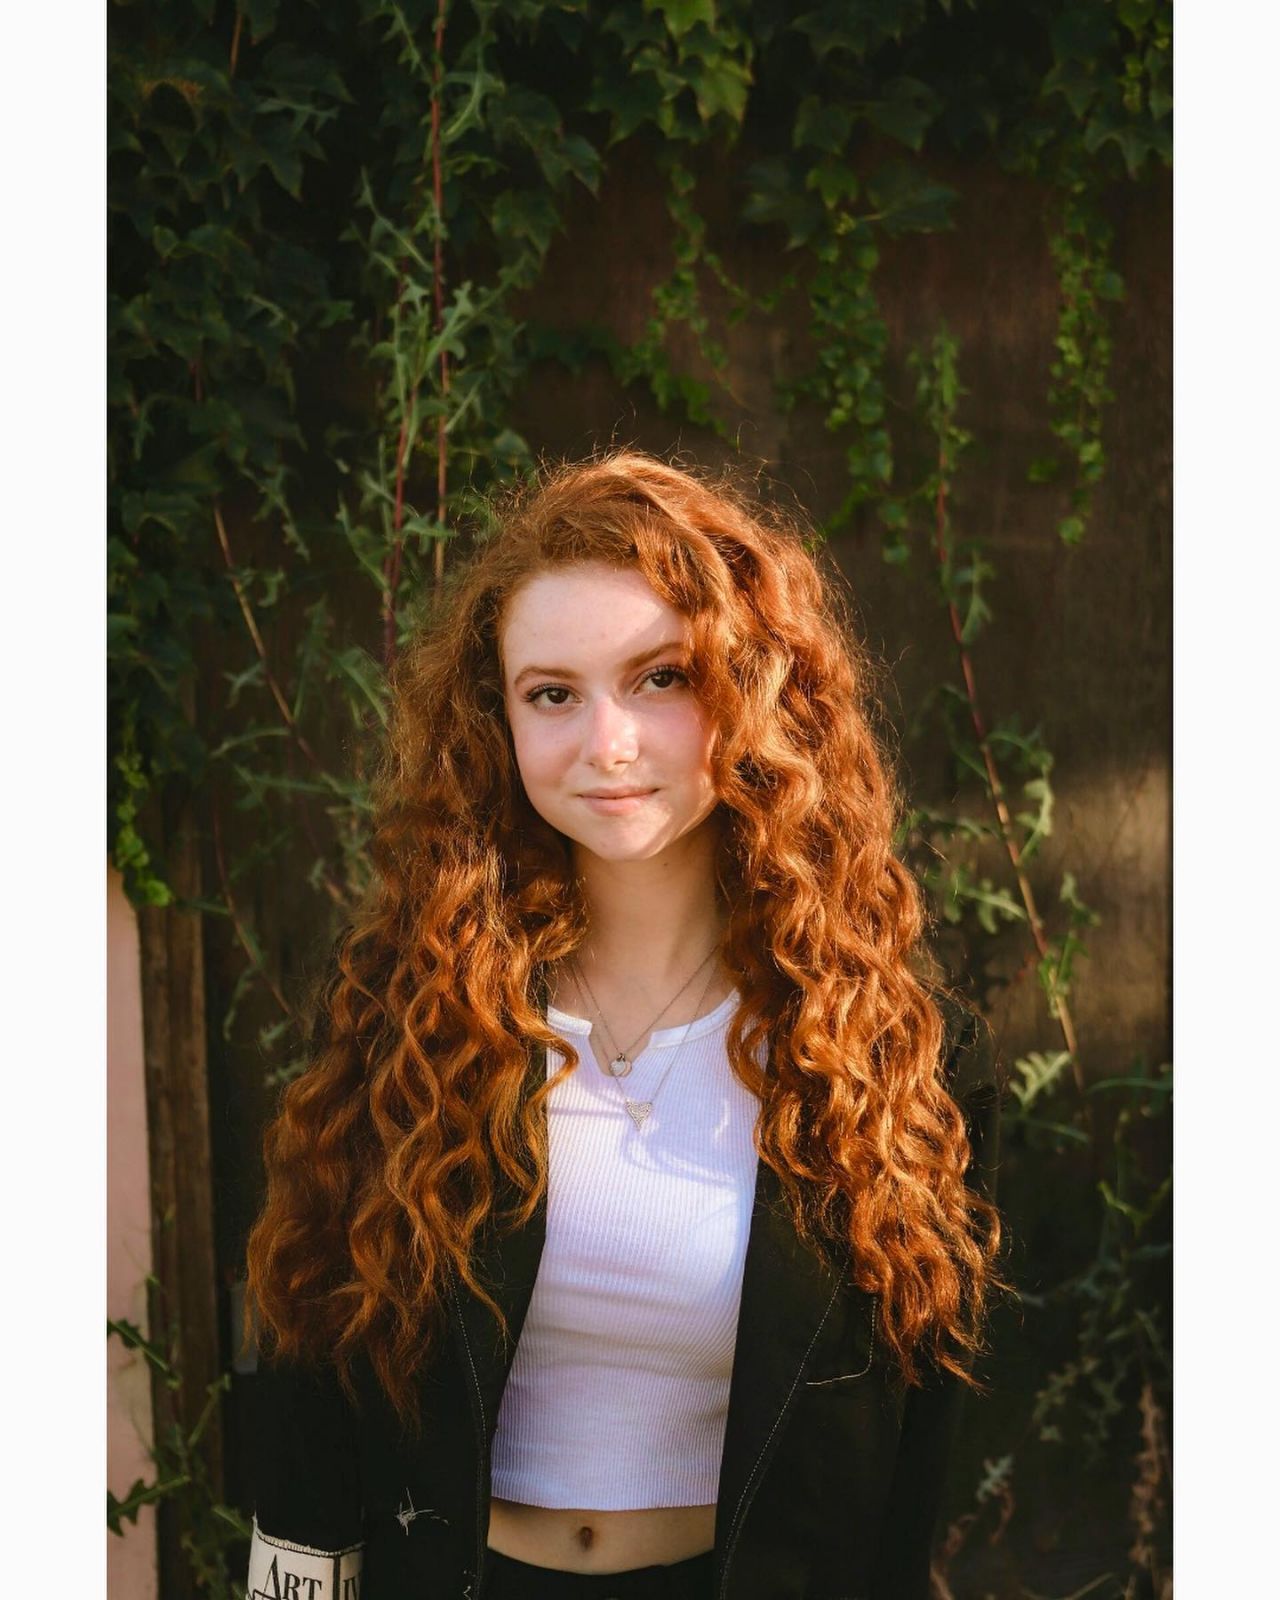 Francesca Capaldi Style, Clothes, Outfits and Fashion.